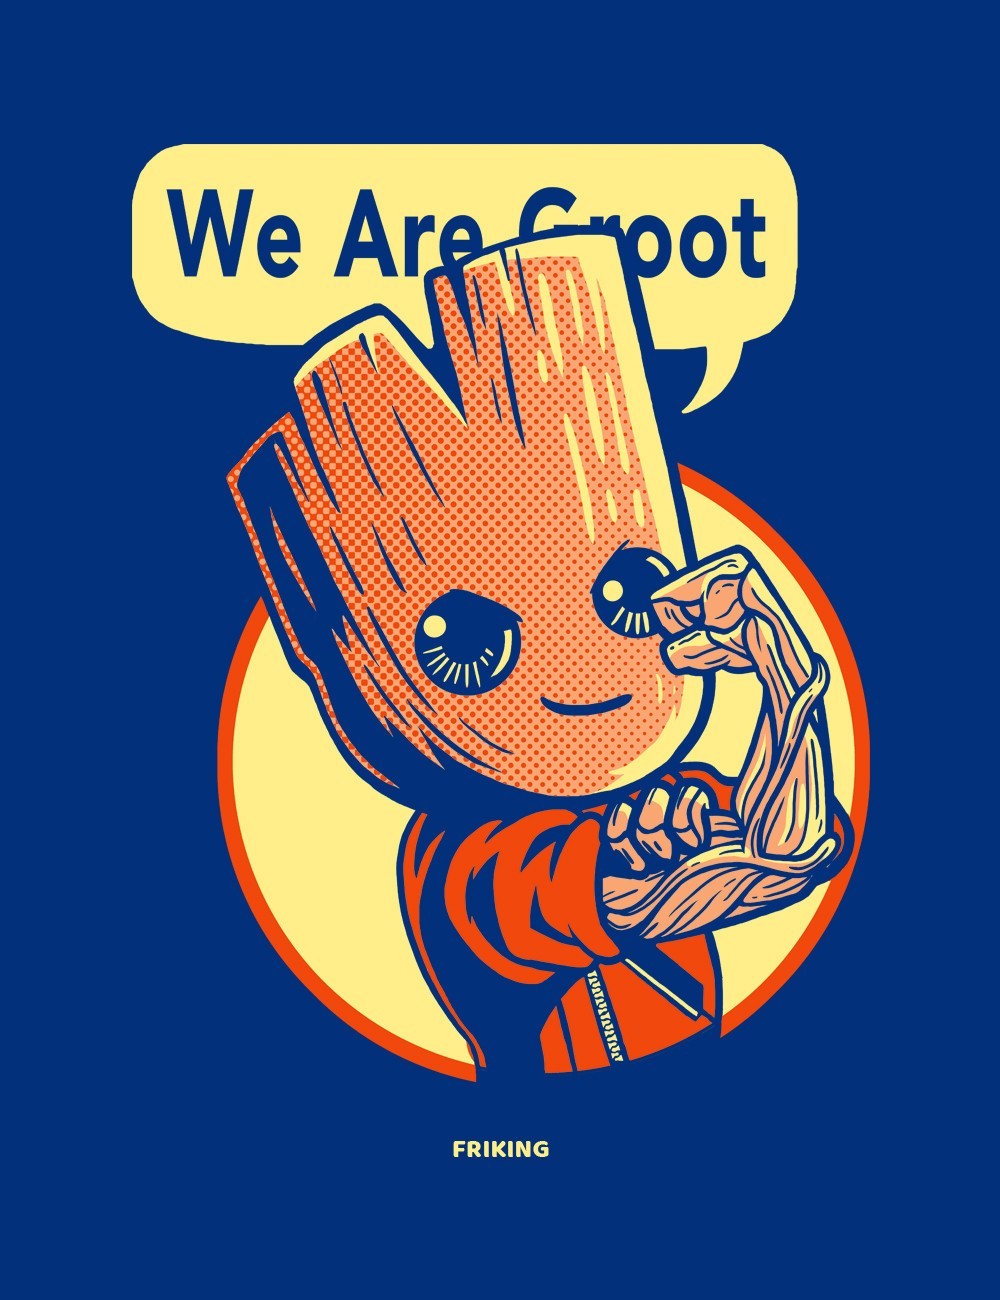  We are groot! 